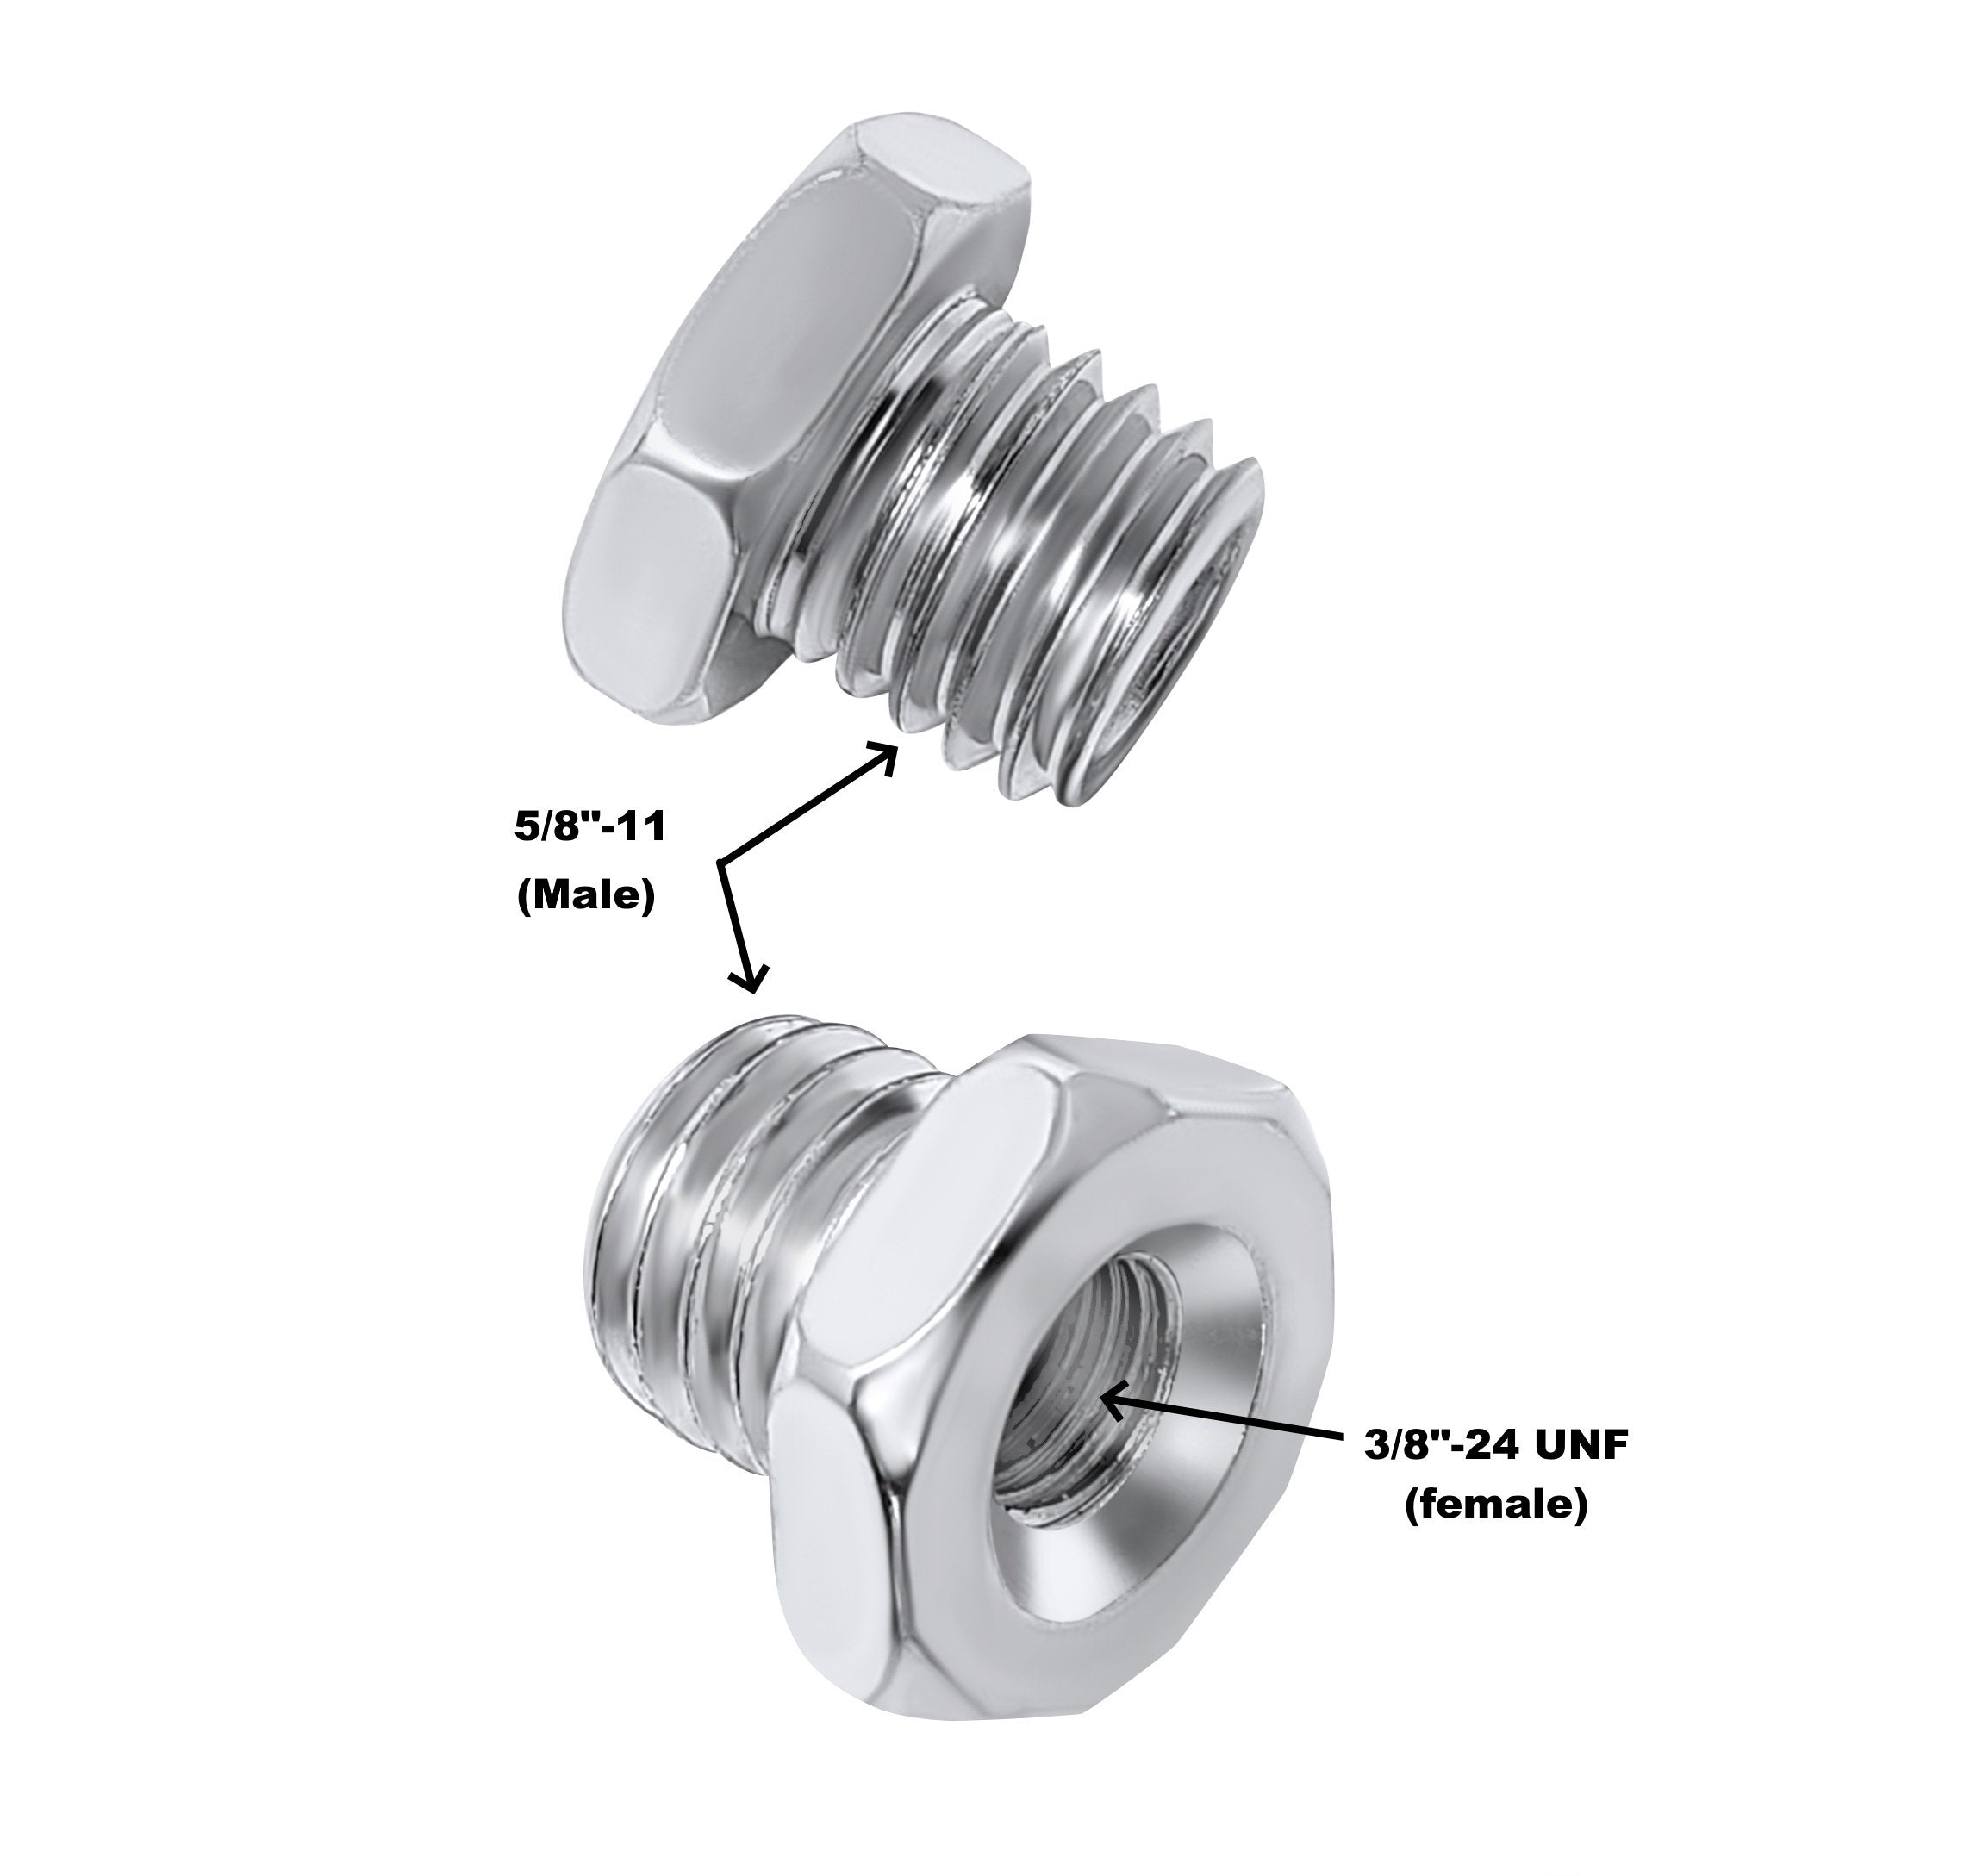 2pk Reducing Arbor Adapters for Wire Brushes on Angle Grinders From 5/8-11 to 3/8-24 UNF Arbor